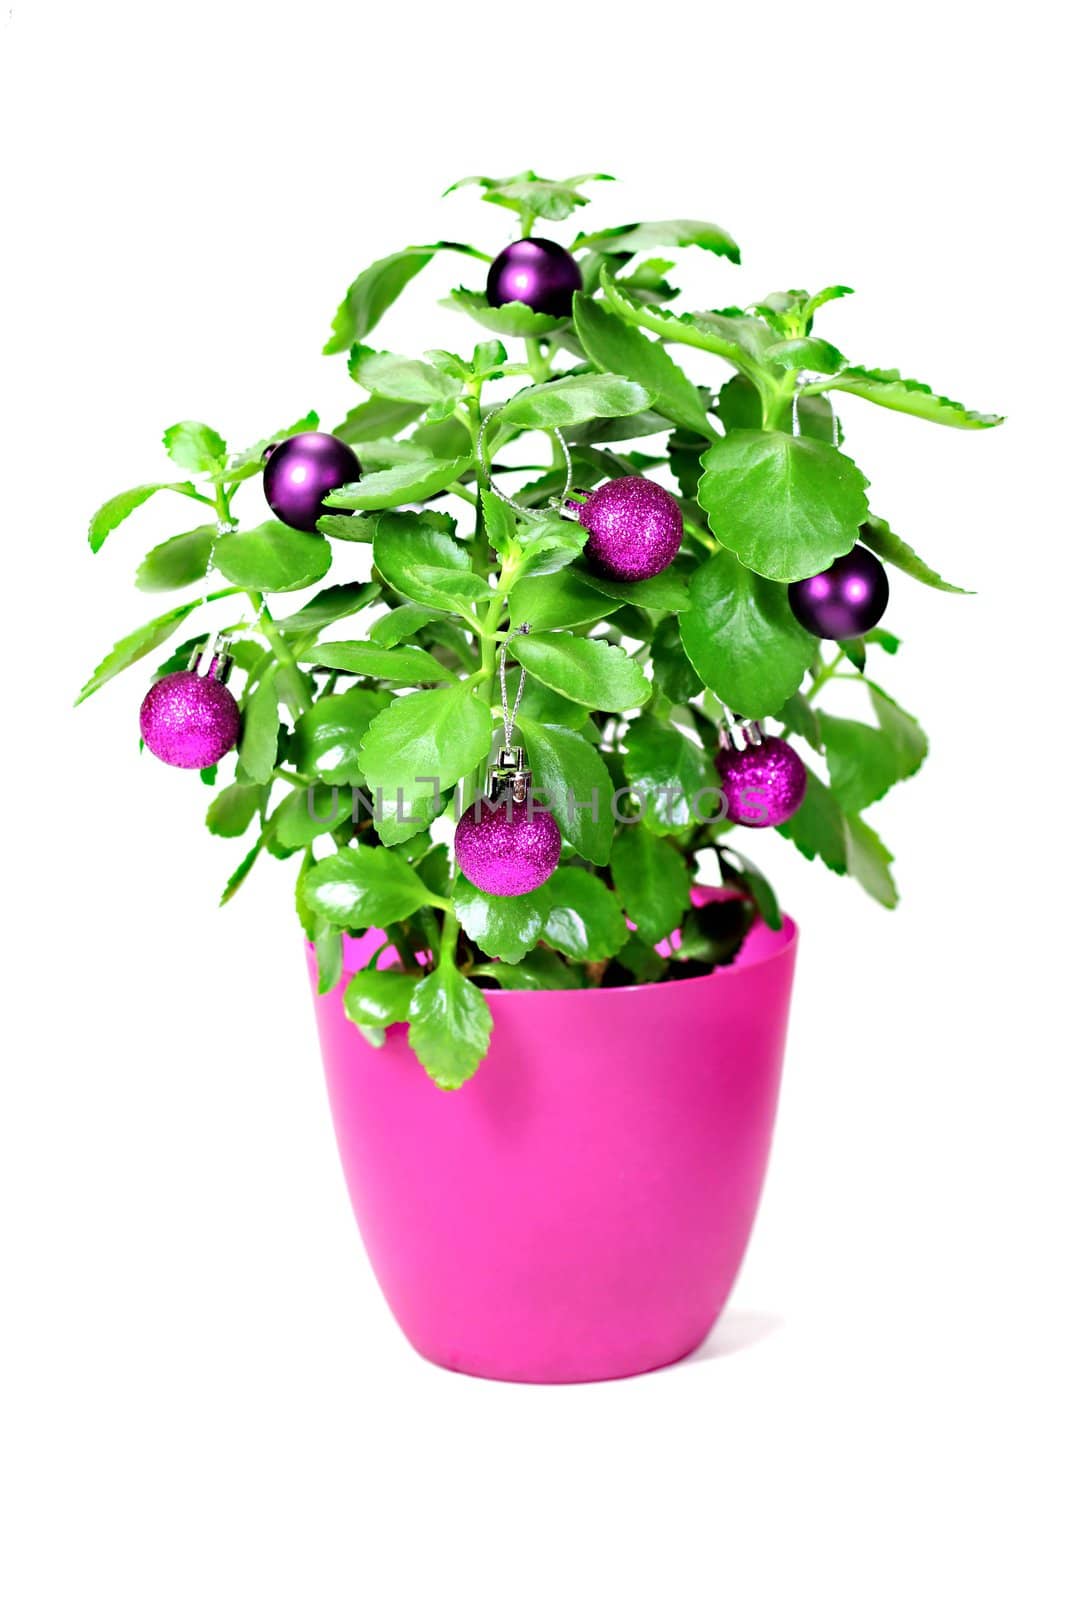 Christmas green plant with baubles by Kristina_Usoltseva